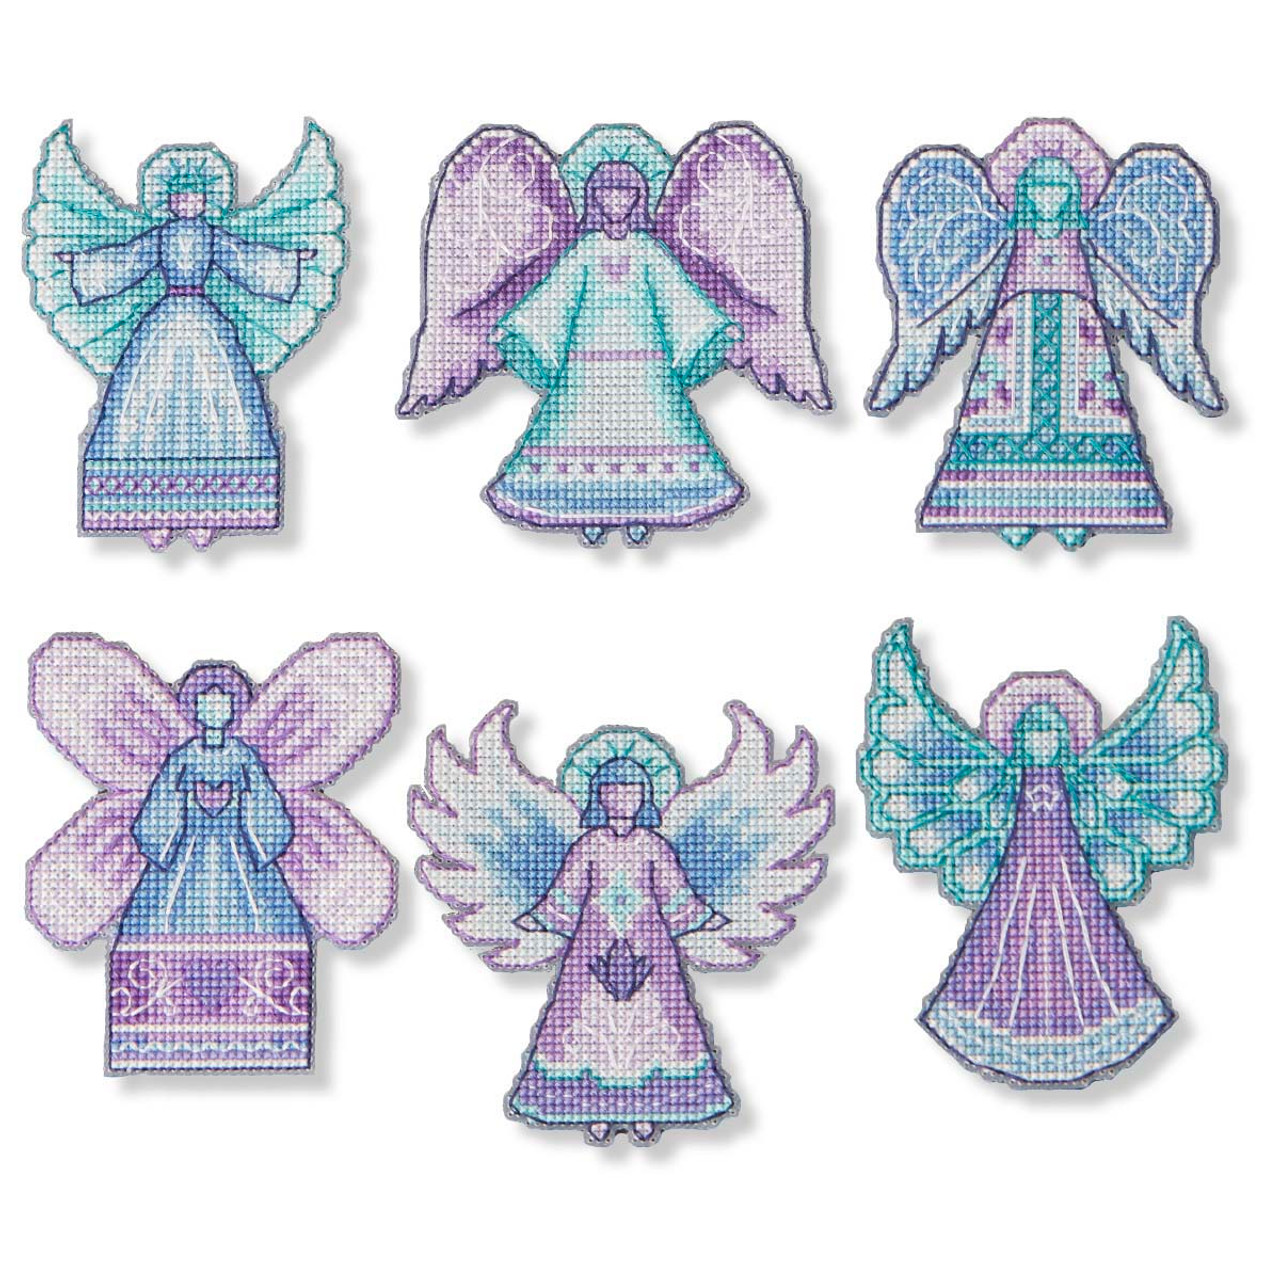 Herrschners Christmas Helpers Sled Ornaments Counted Cross-Stitch Kit